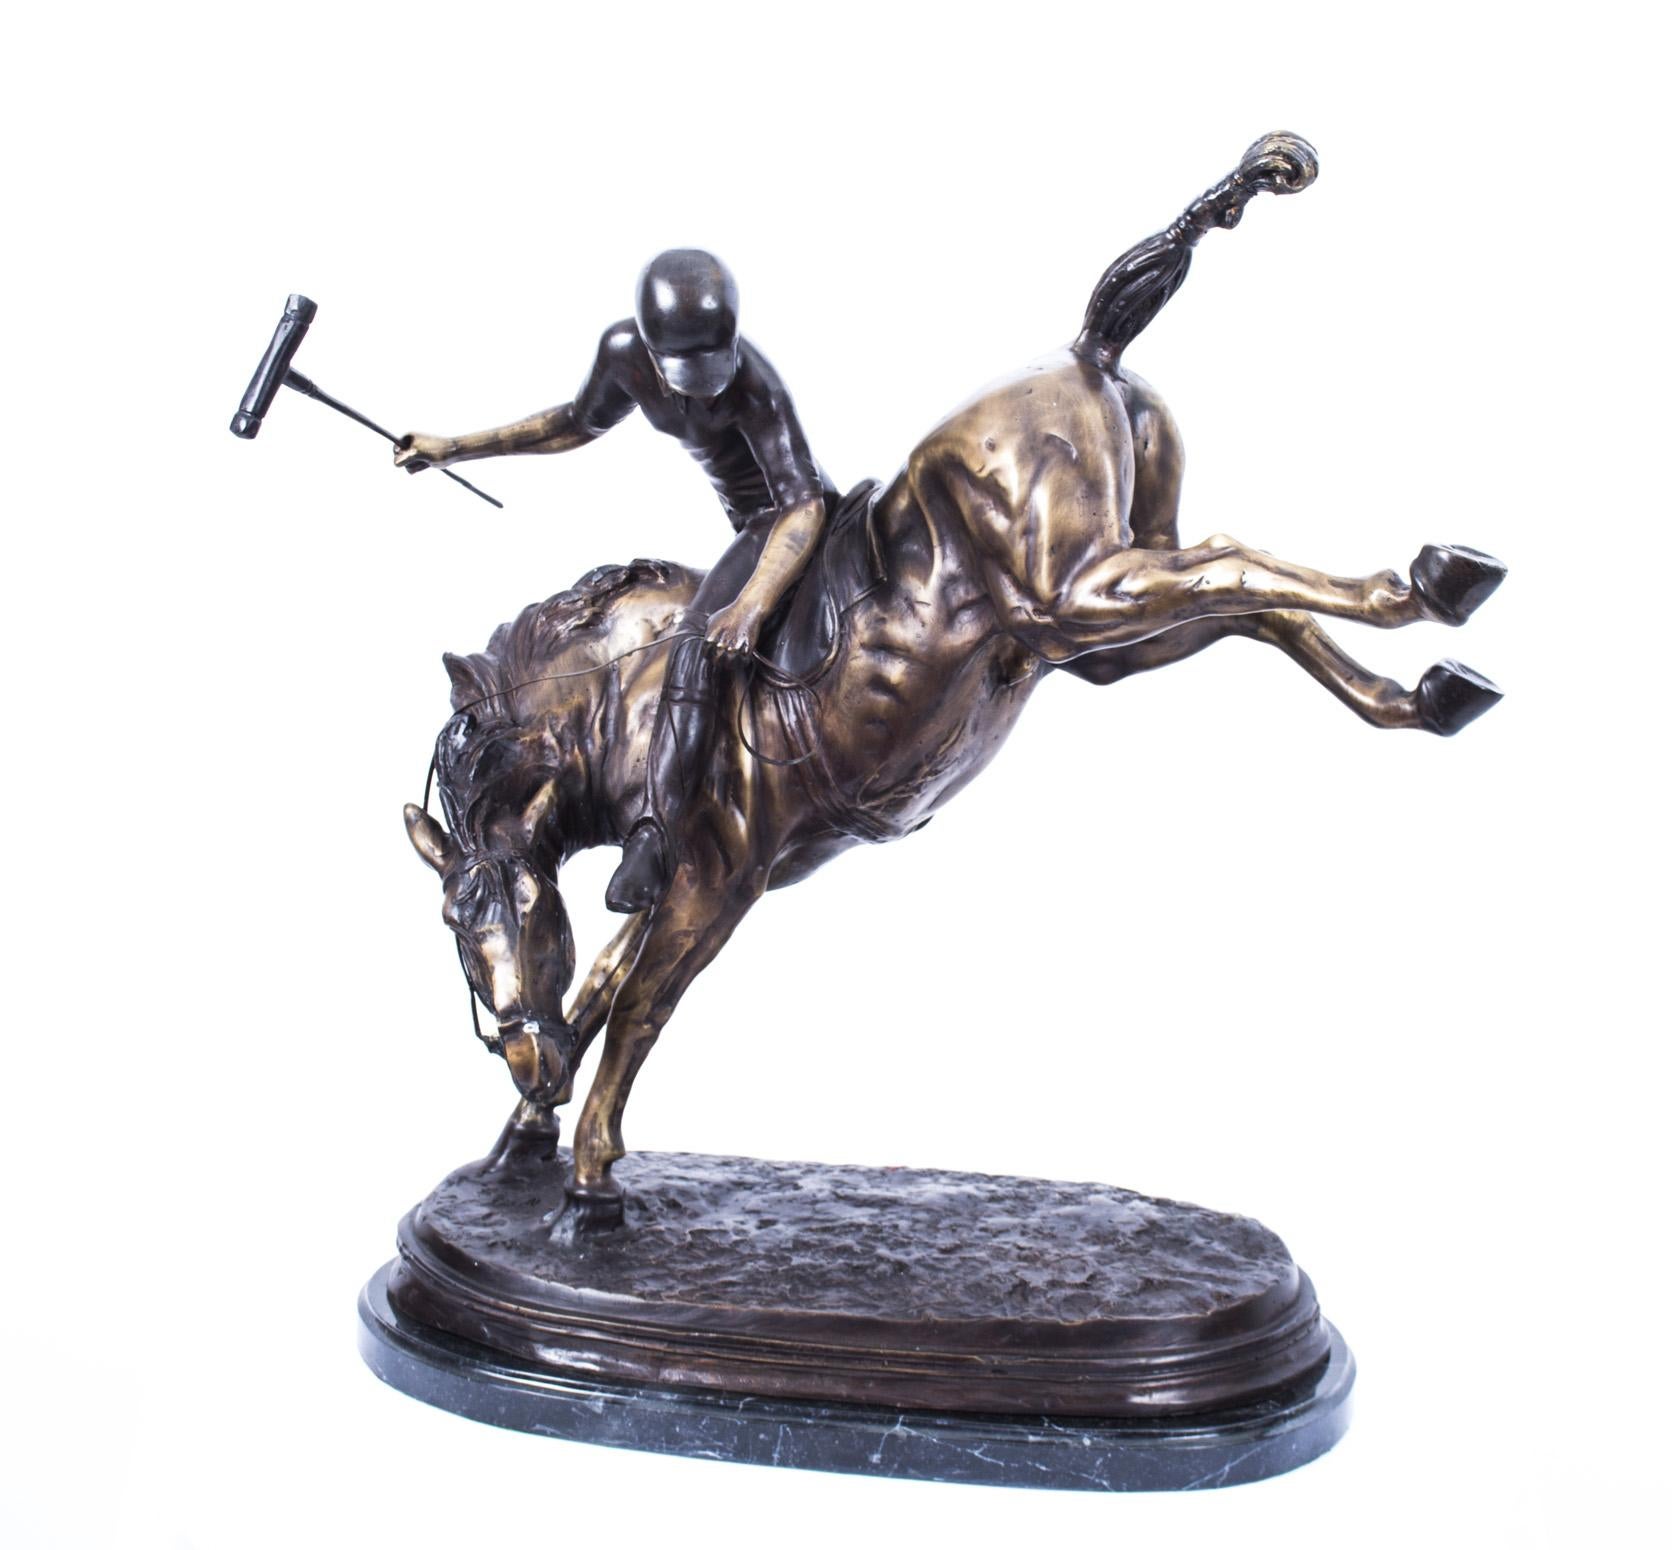 Vintage Bronze Polo Player Bucking a Horse Sculpture, 20th Century For Sale 5